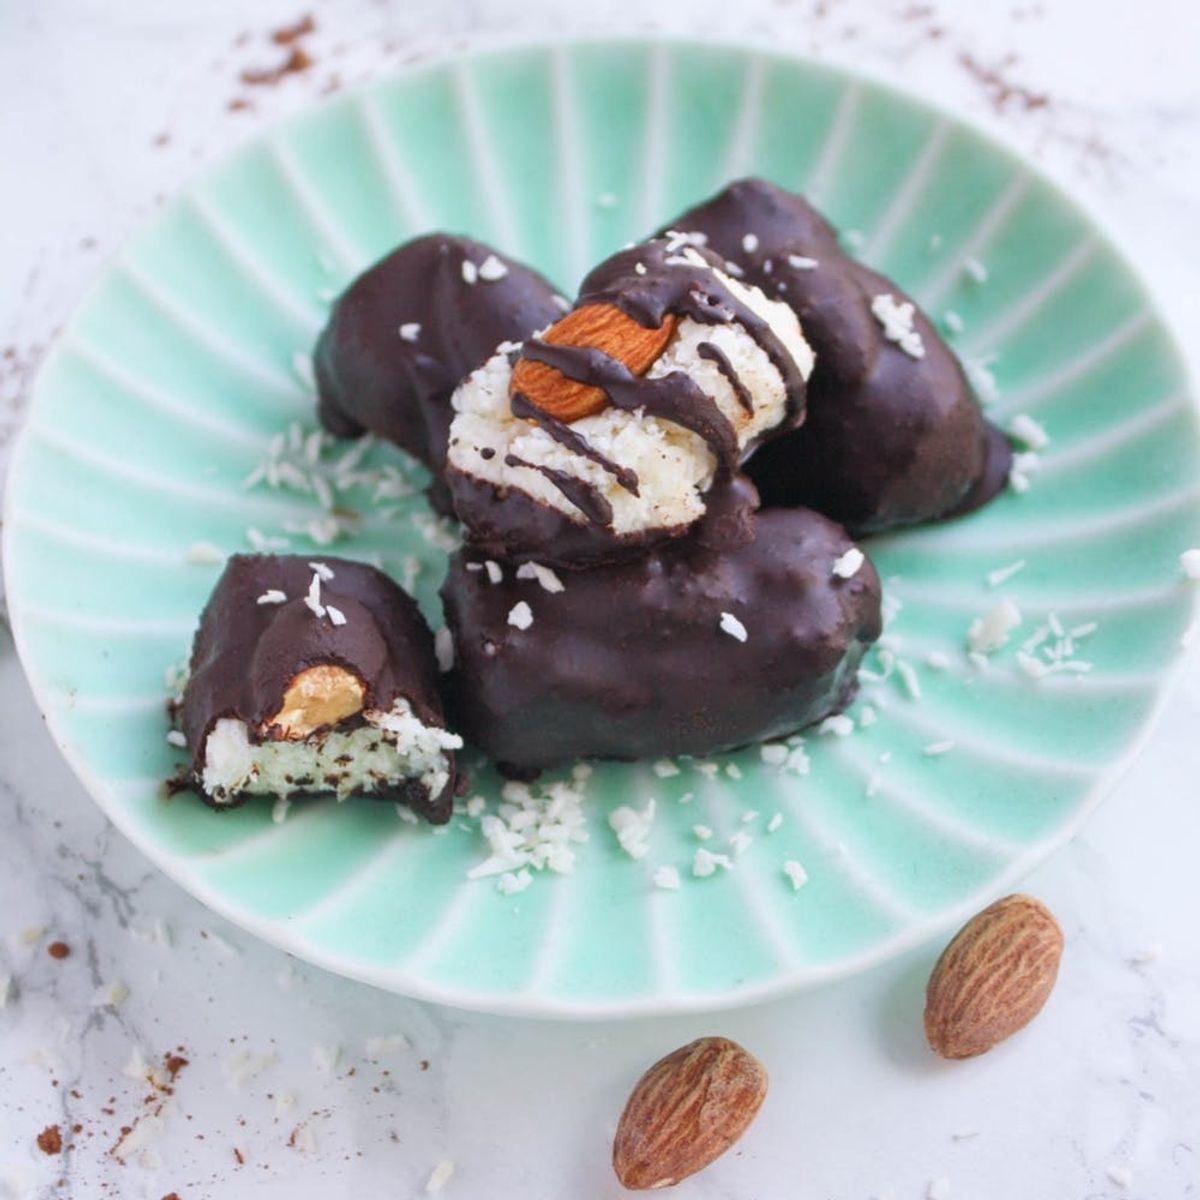 Satisfy Your Paleo Sweet Tooth With Homemade Almond Joys